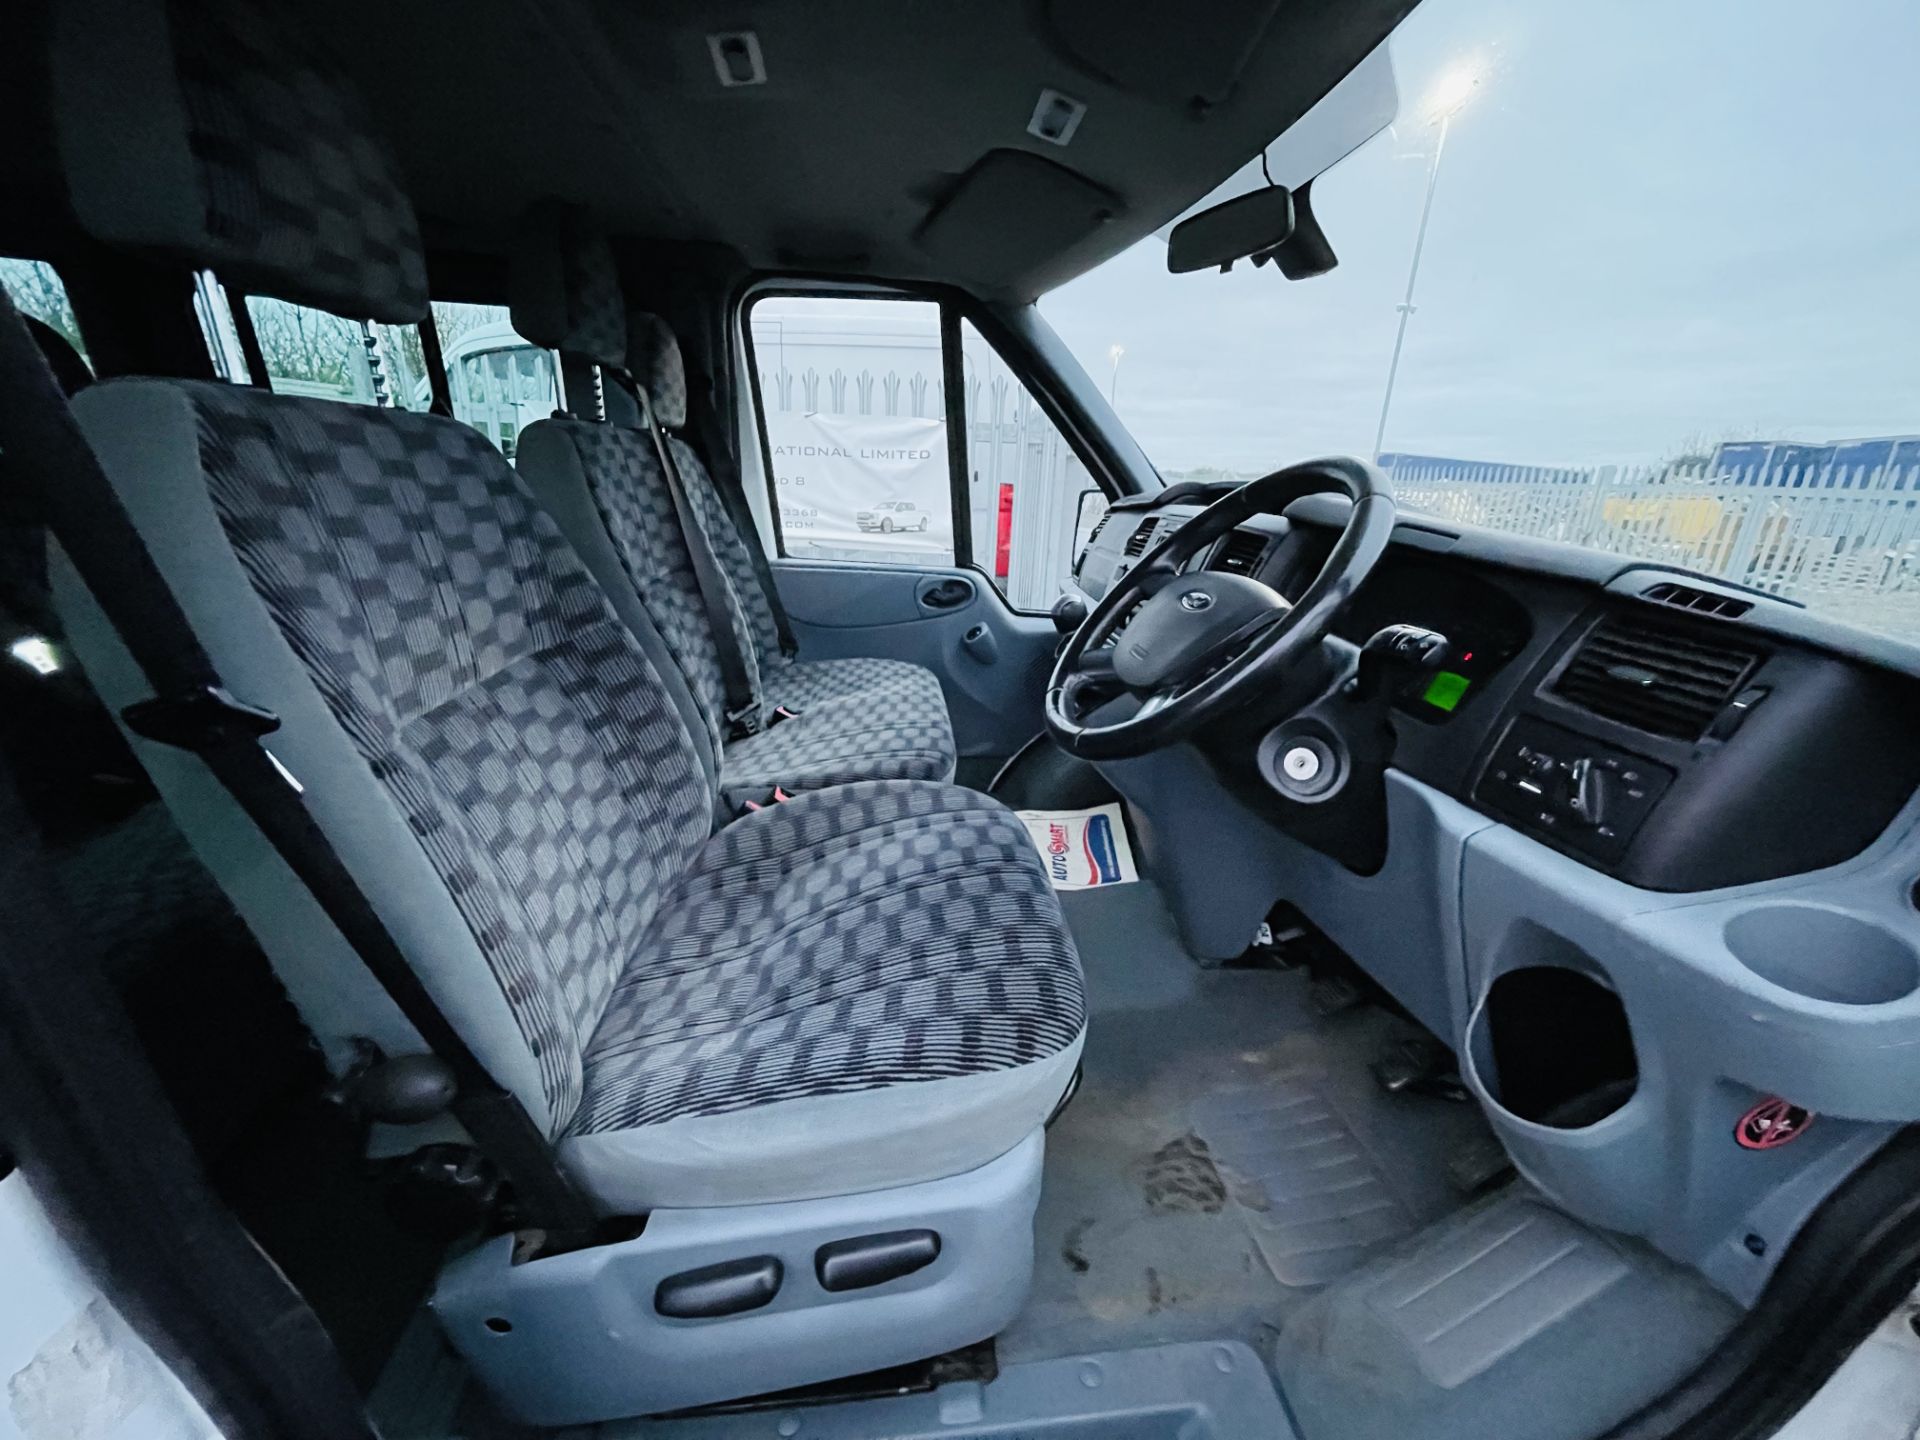 ** ON SALE ** Ford Transit Toureno 2.2 TDCI Trend 2013 '13 Reg' 9 seats - Air Con - Cruise Control** - Image 21 of 25